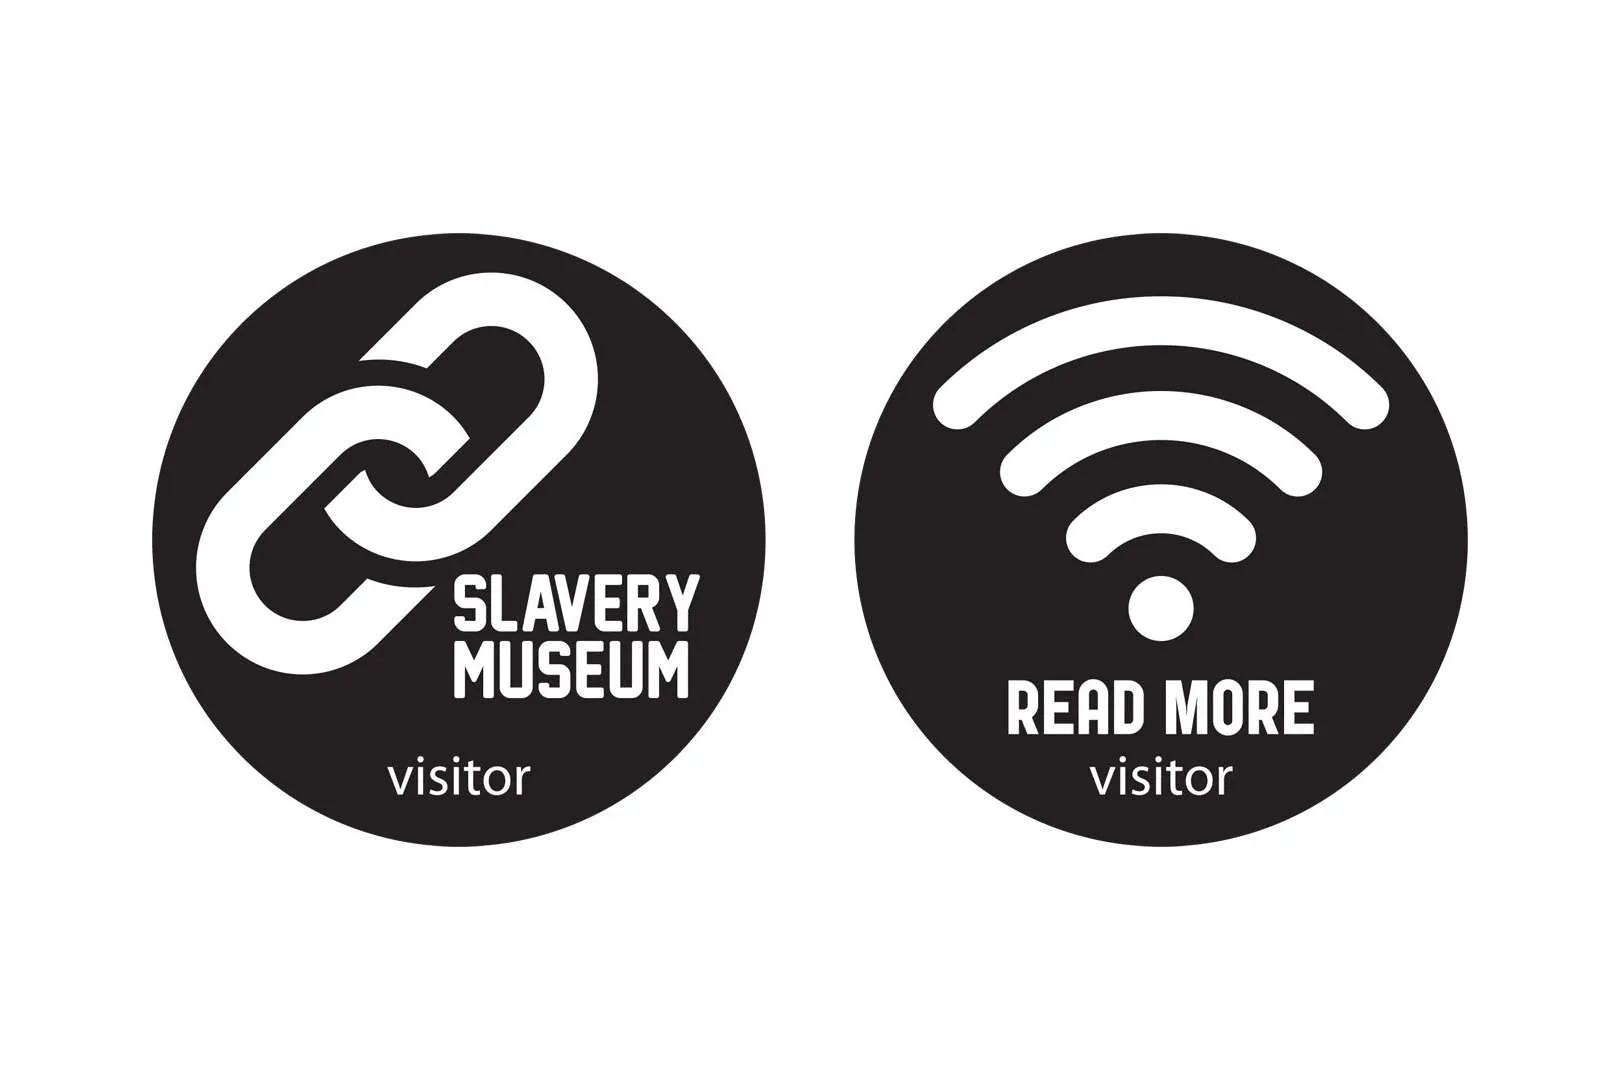 Two labels, one that reads Slavery Museum and has a chain icon, and another that says Read More and has a wifi icon